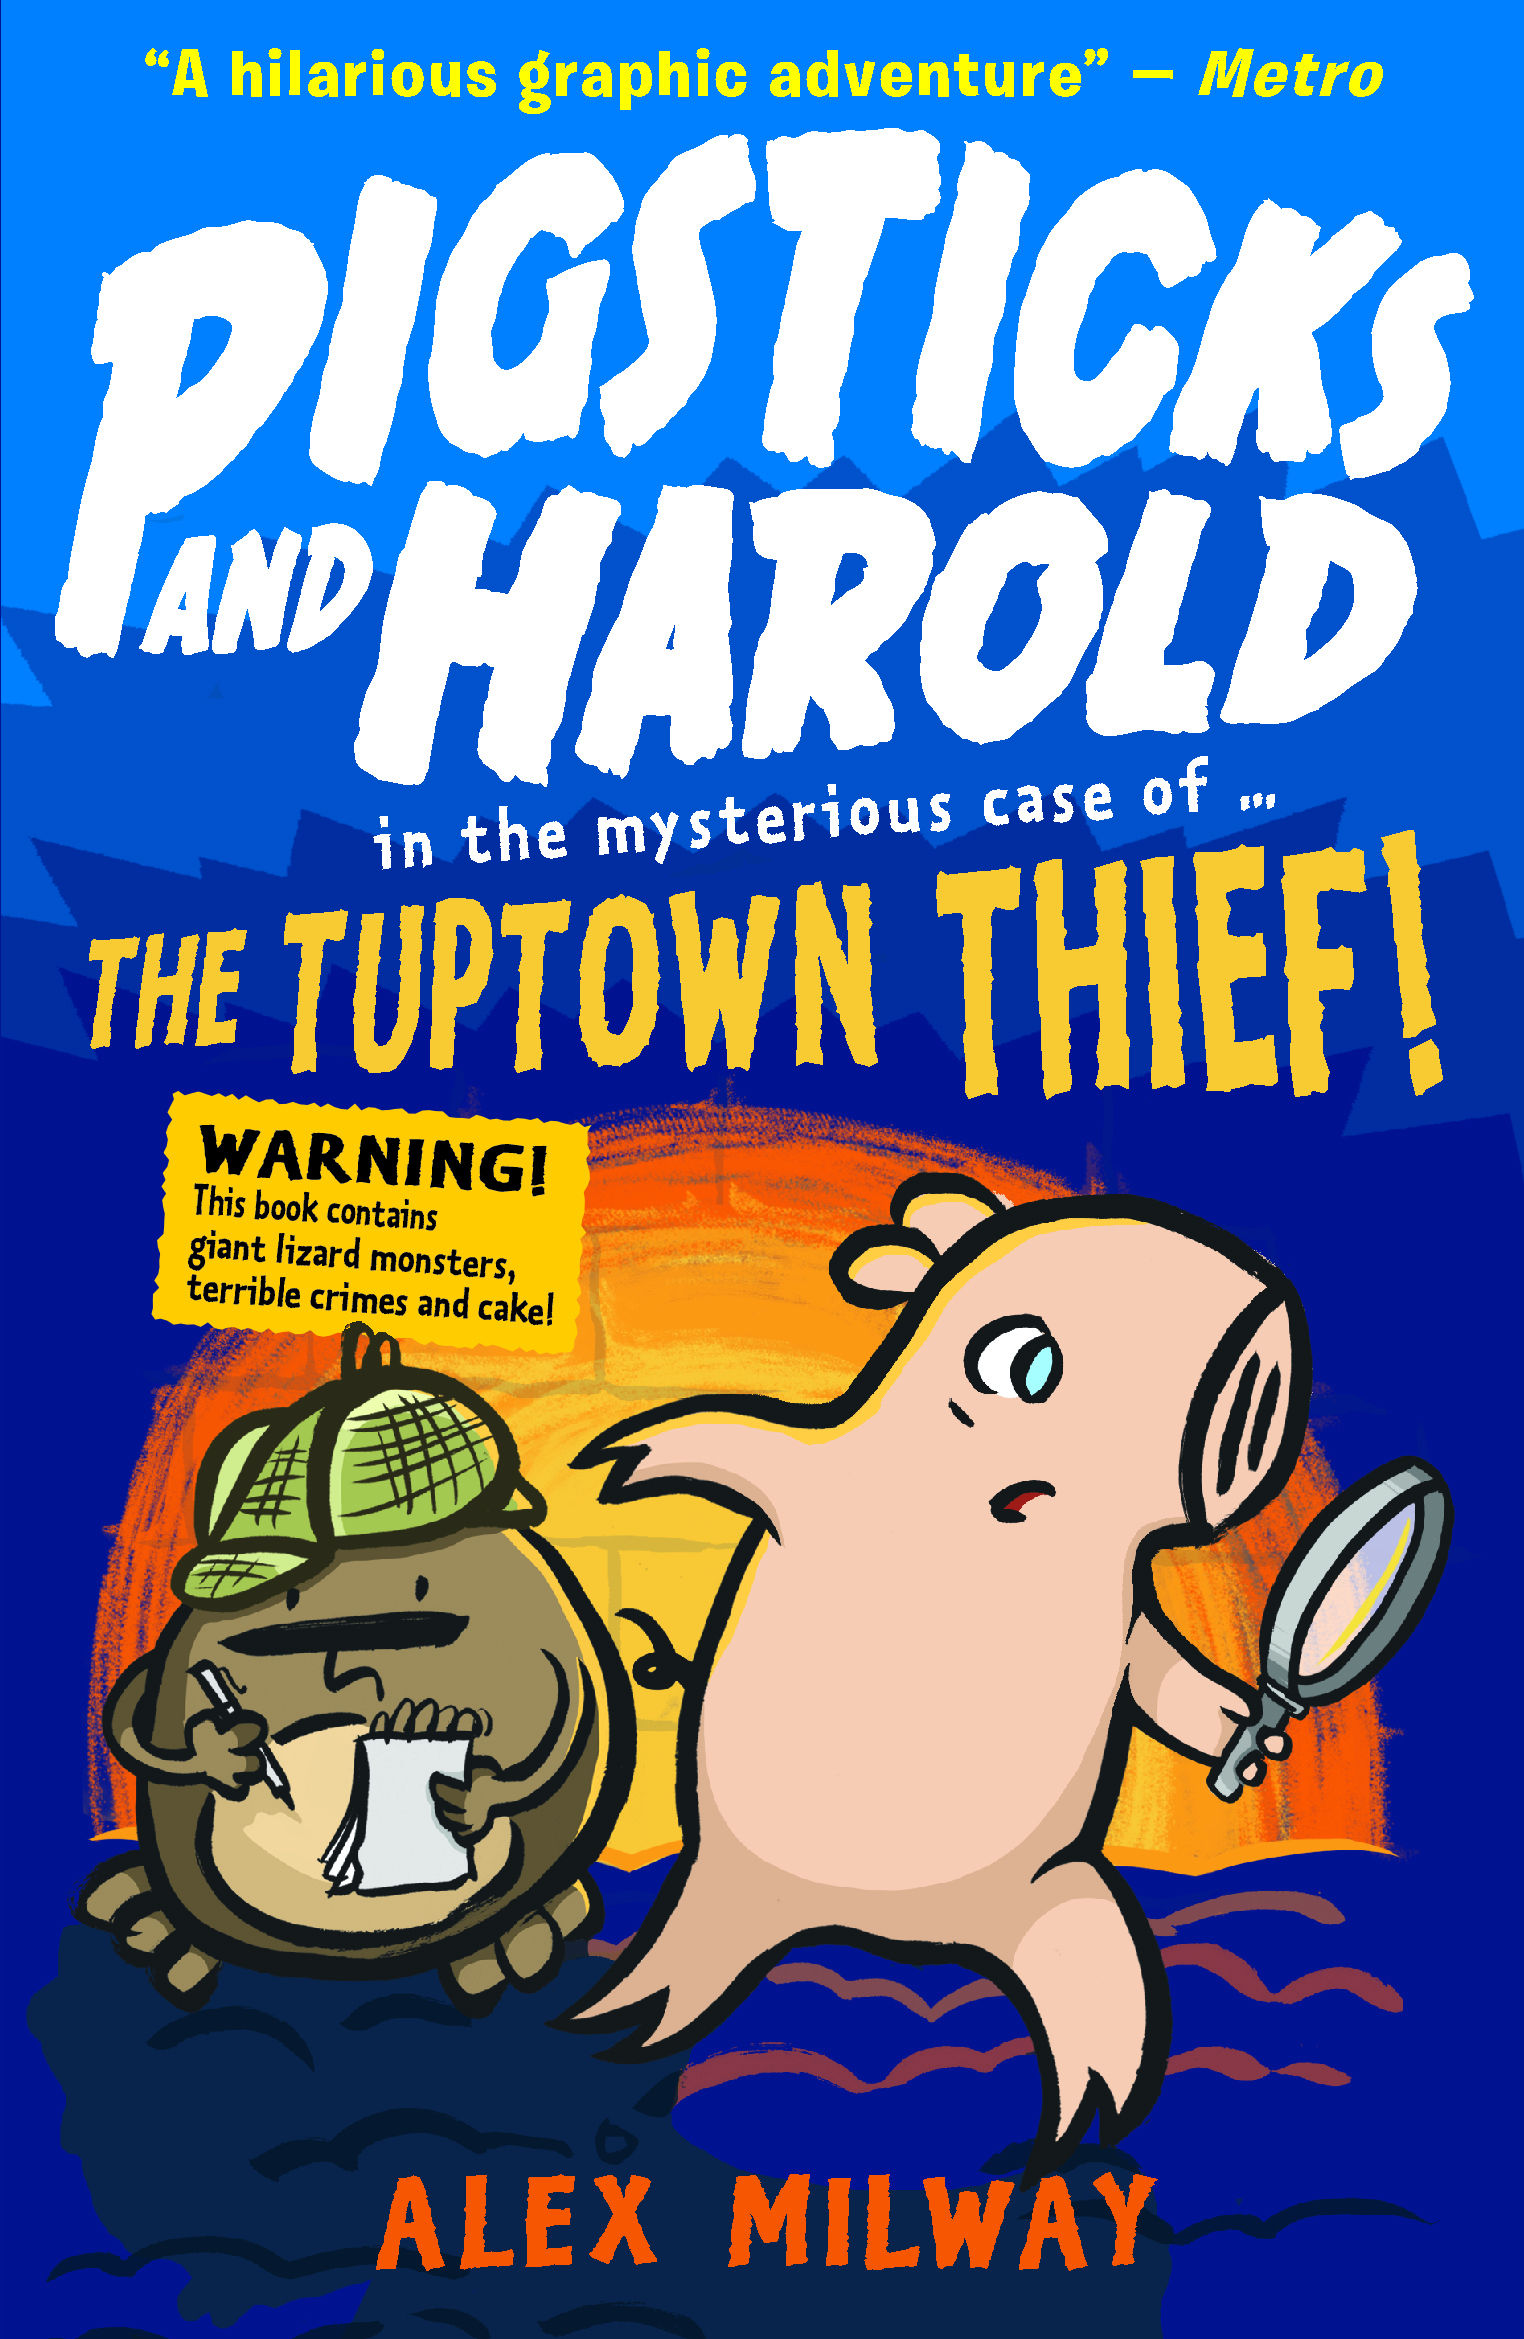 Pigsticks-and-Harold-the-Tuptown-Thief